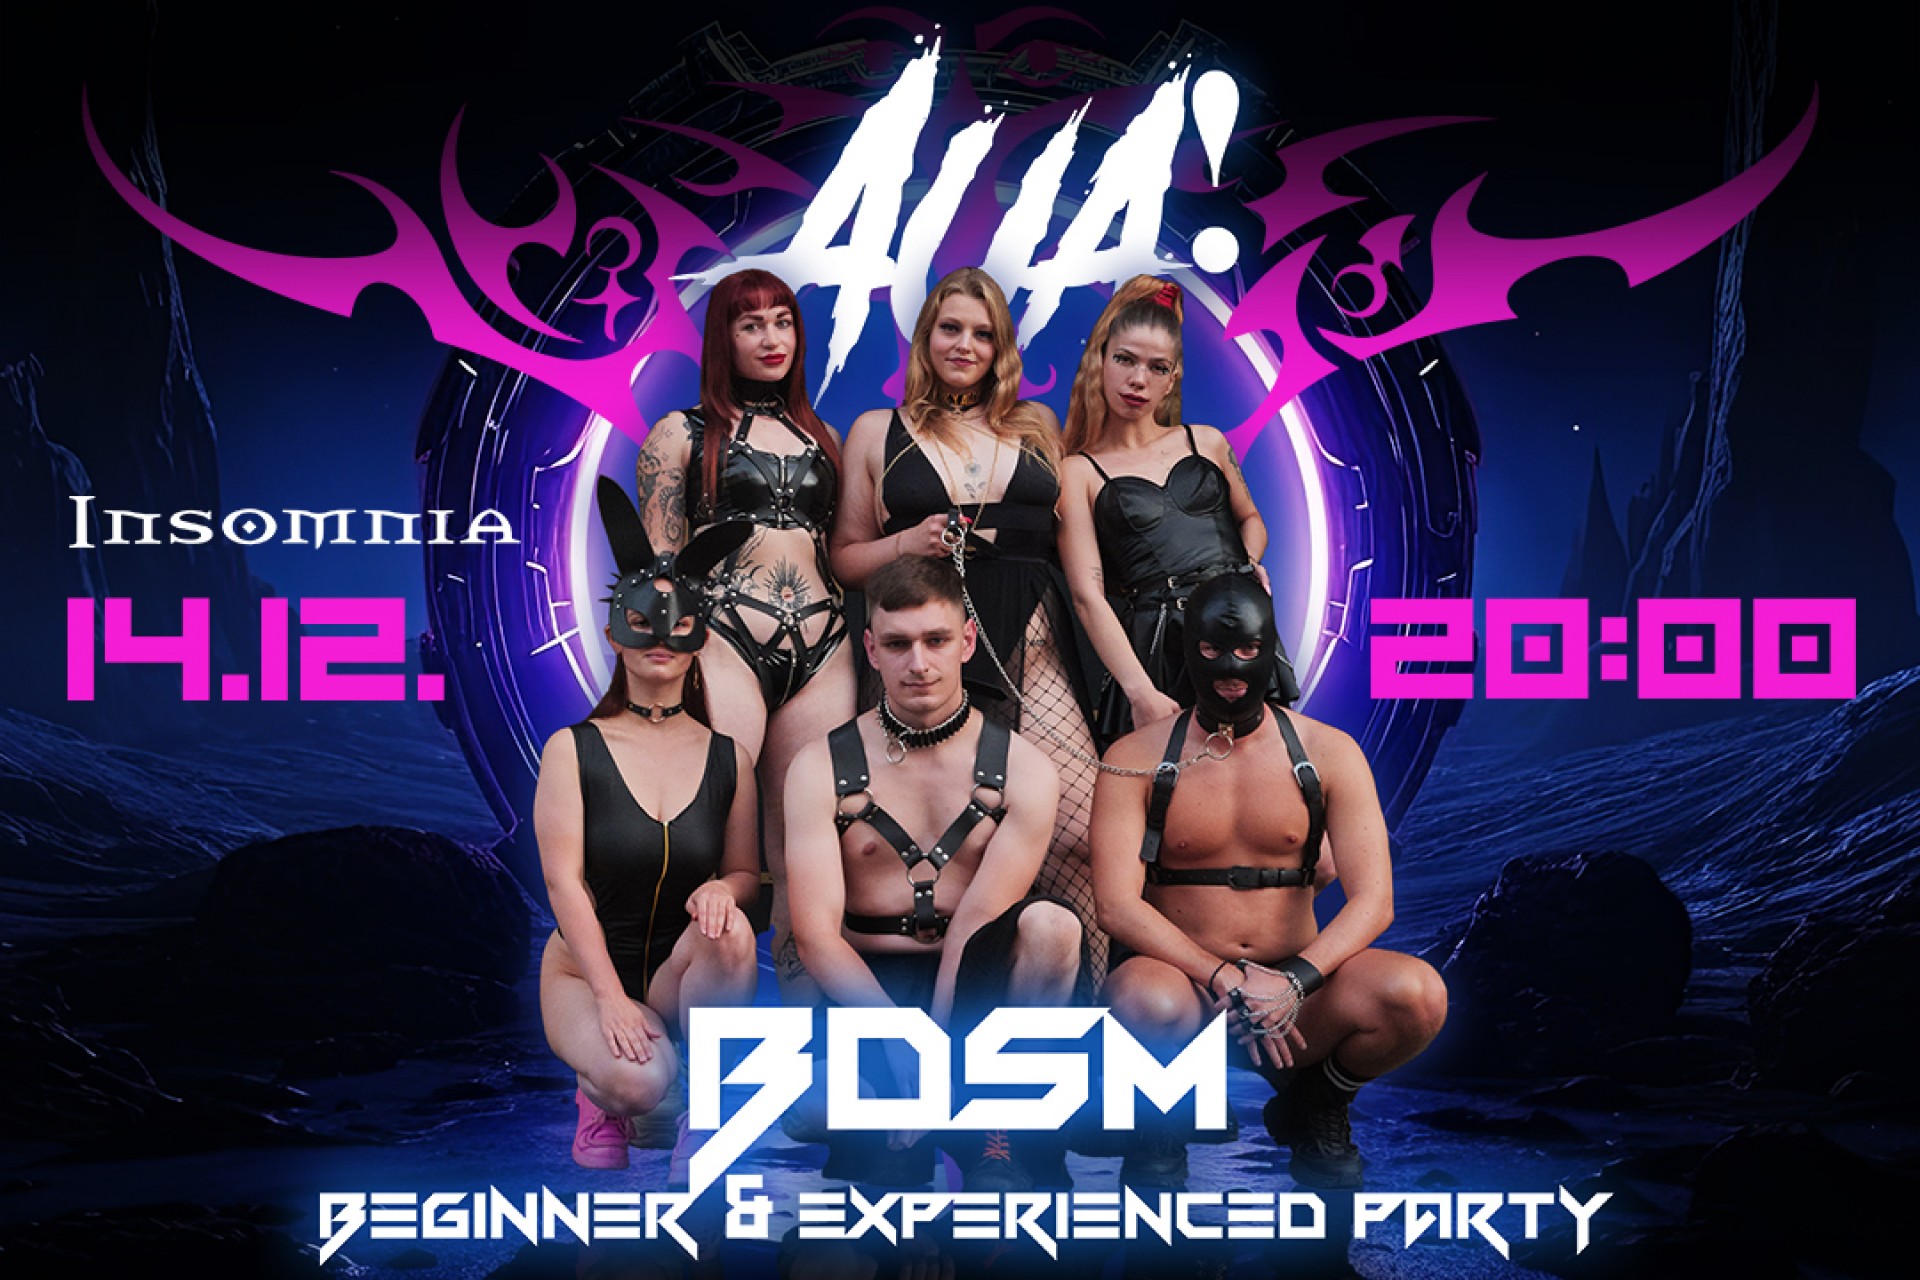 AUA! BDSM Party for Beginners and Experienced Players